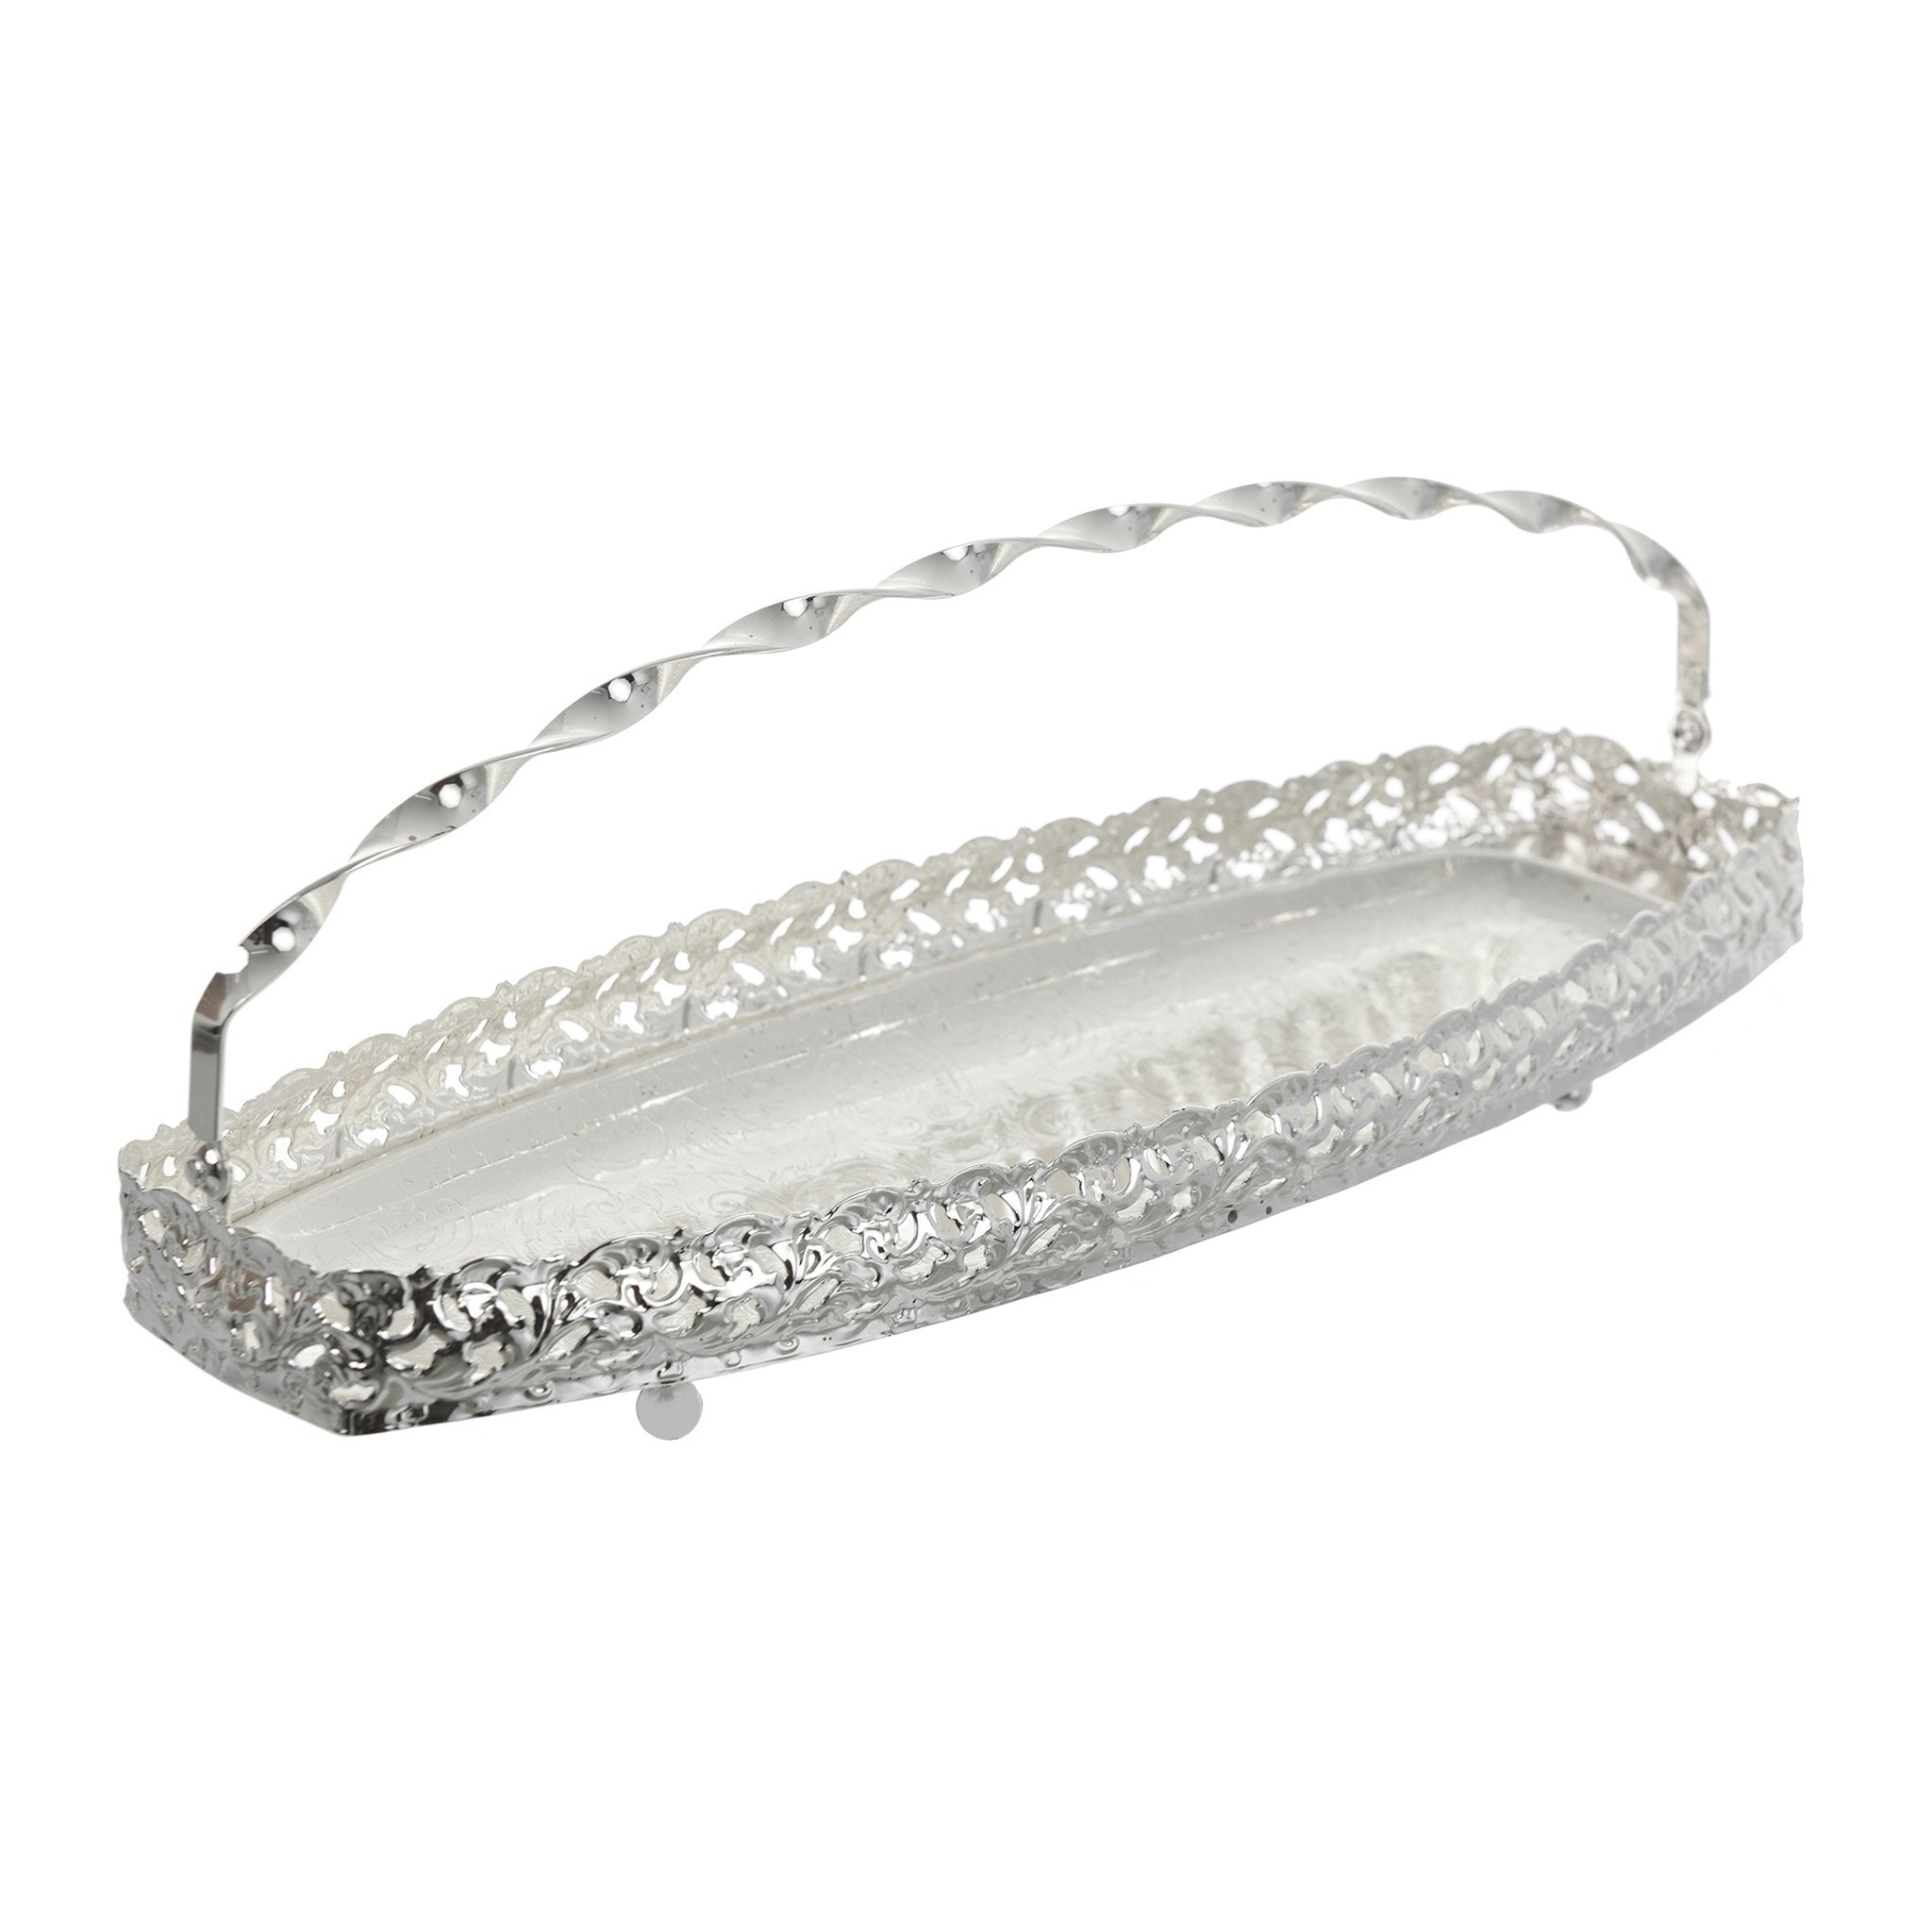 Queen Anne - Cookies Tray with Swing Handle & Legs - Silver Plated Metal - 40x15cm - 26000341